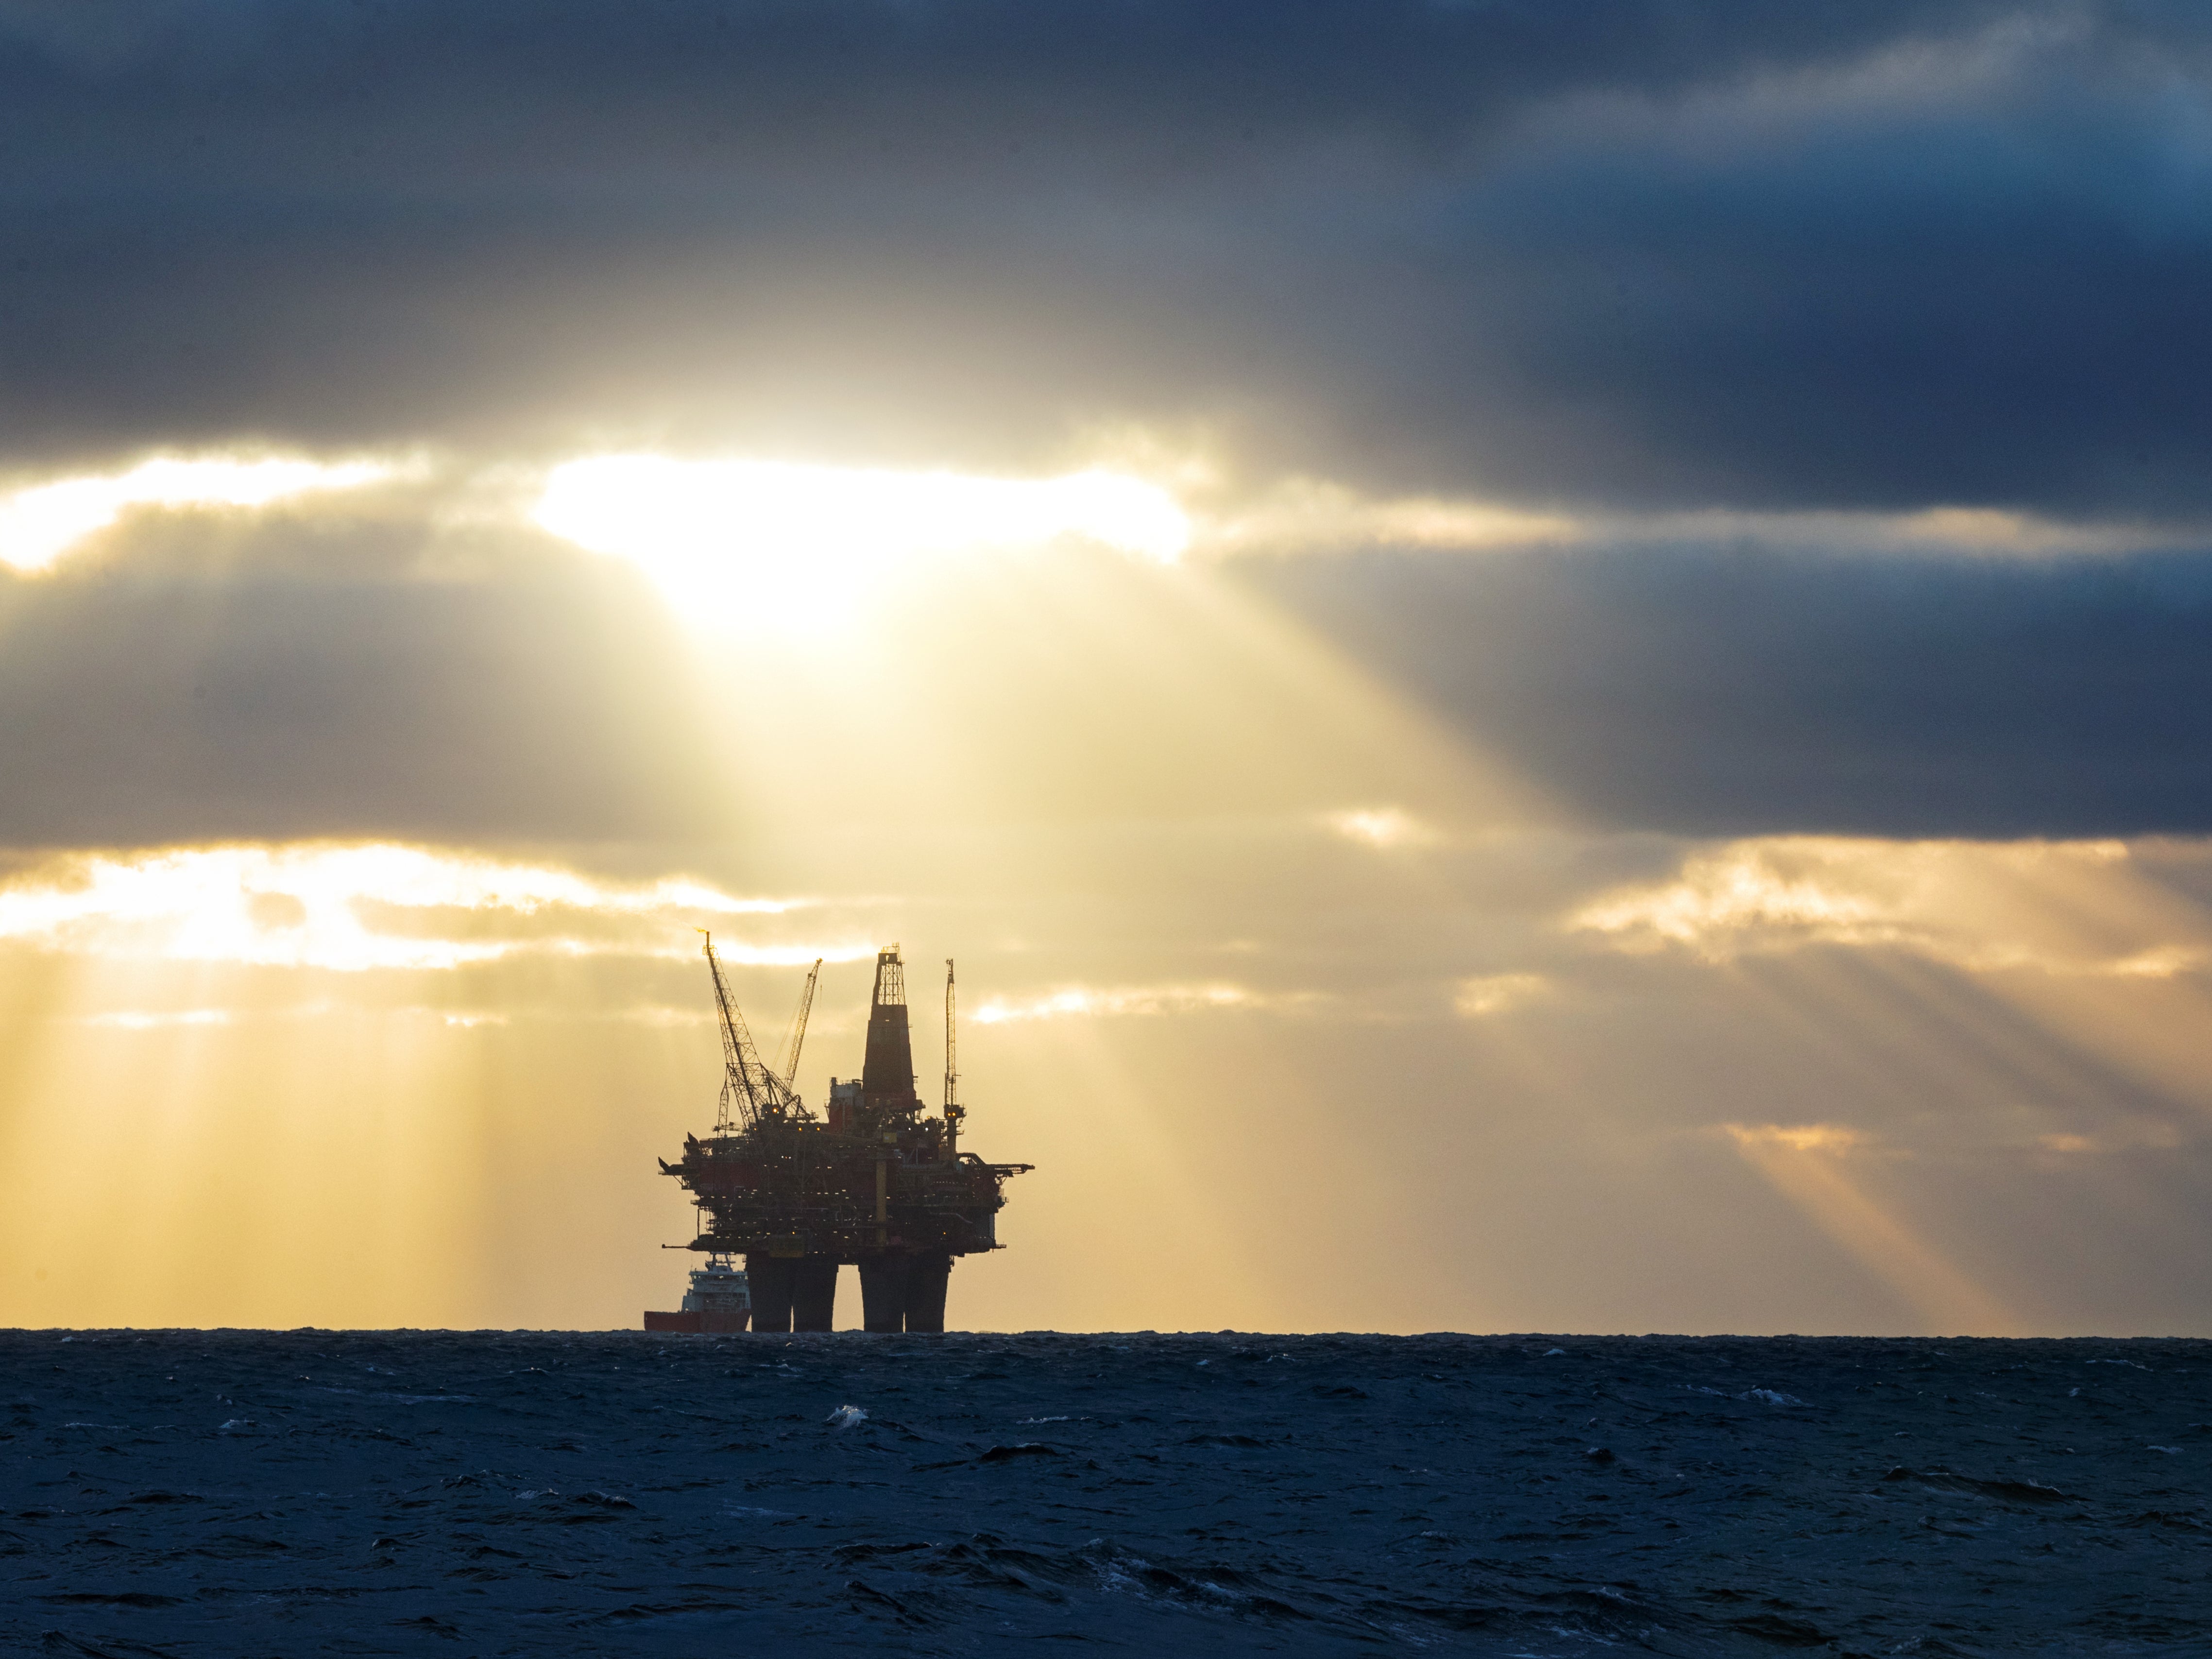 The UK is reportedly set to approve six more oil and gas fields in the North Sea this year